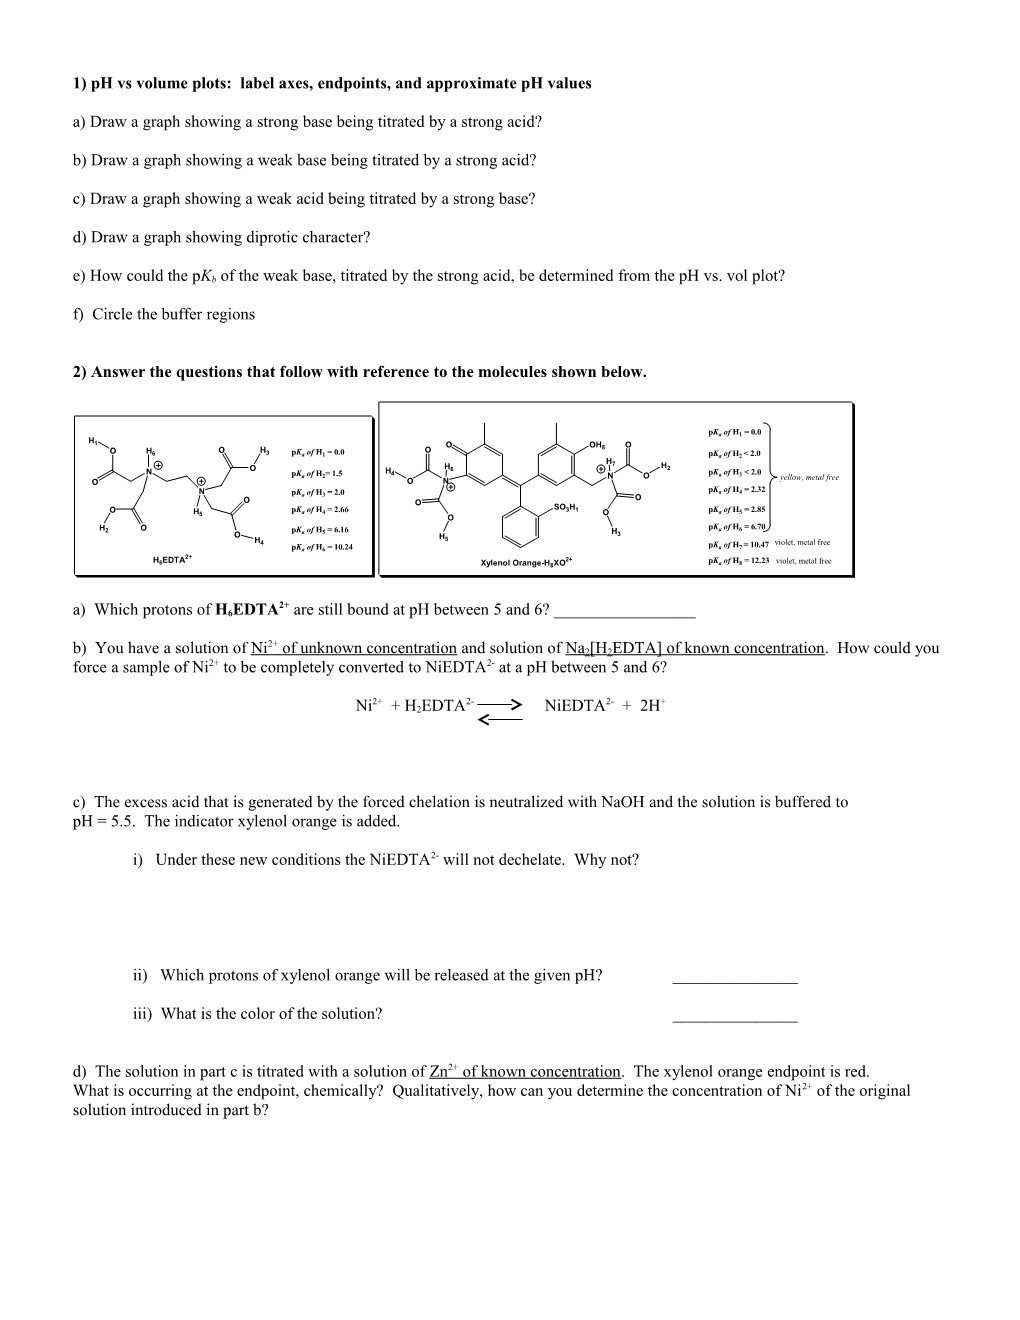 3) (6 Points) Two Students Acquire the Same Solution of Naoh As Titrant